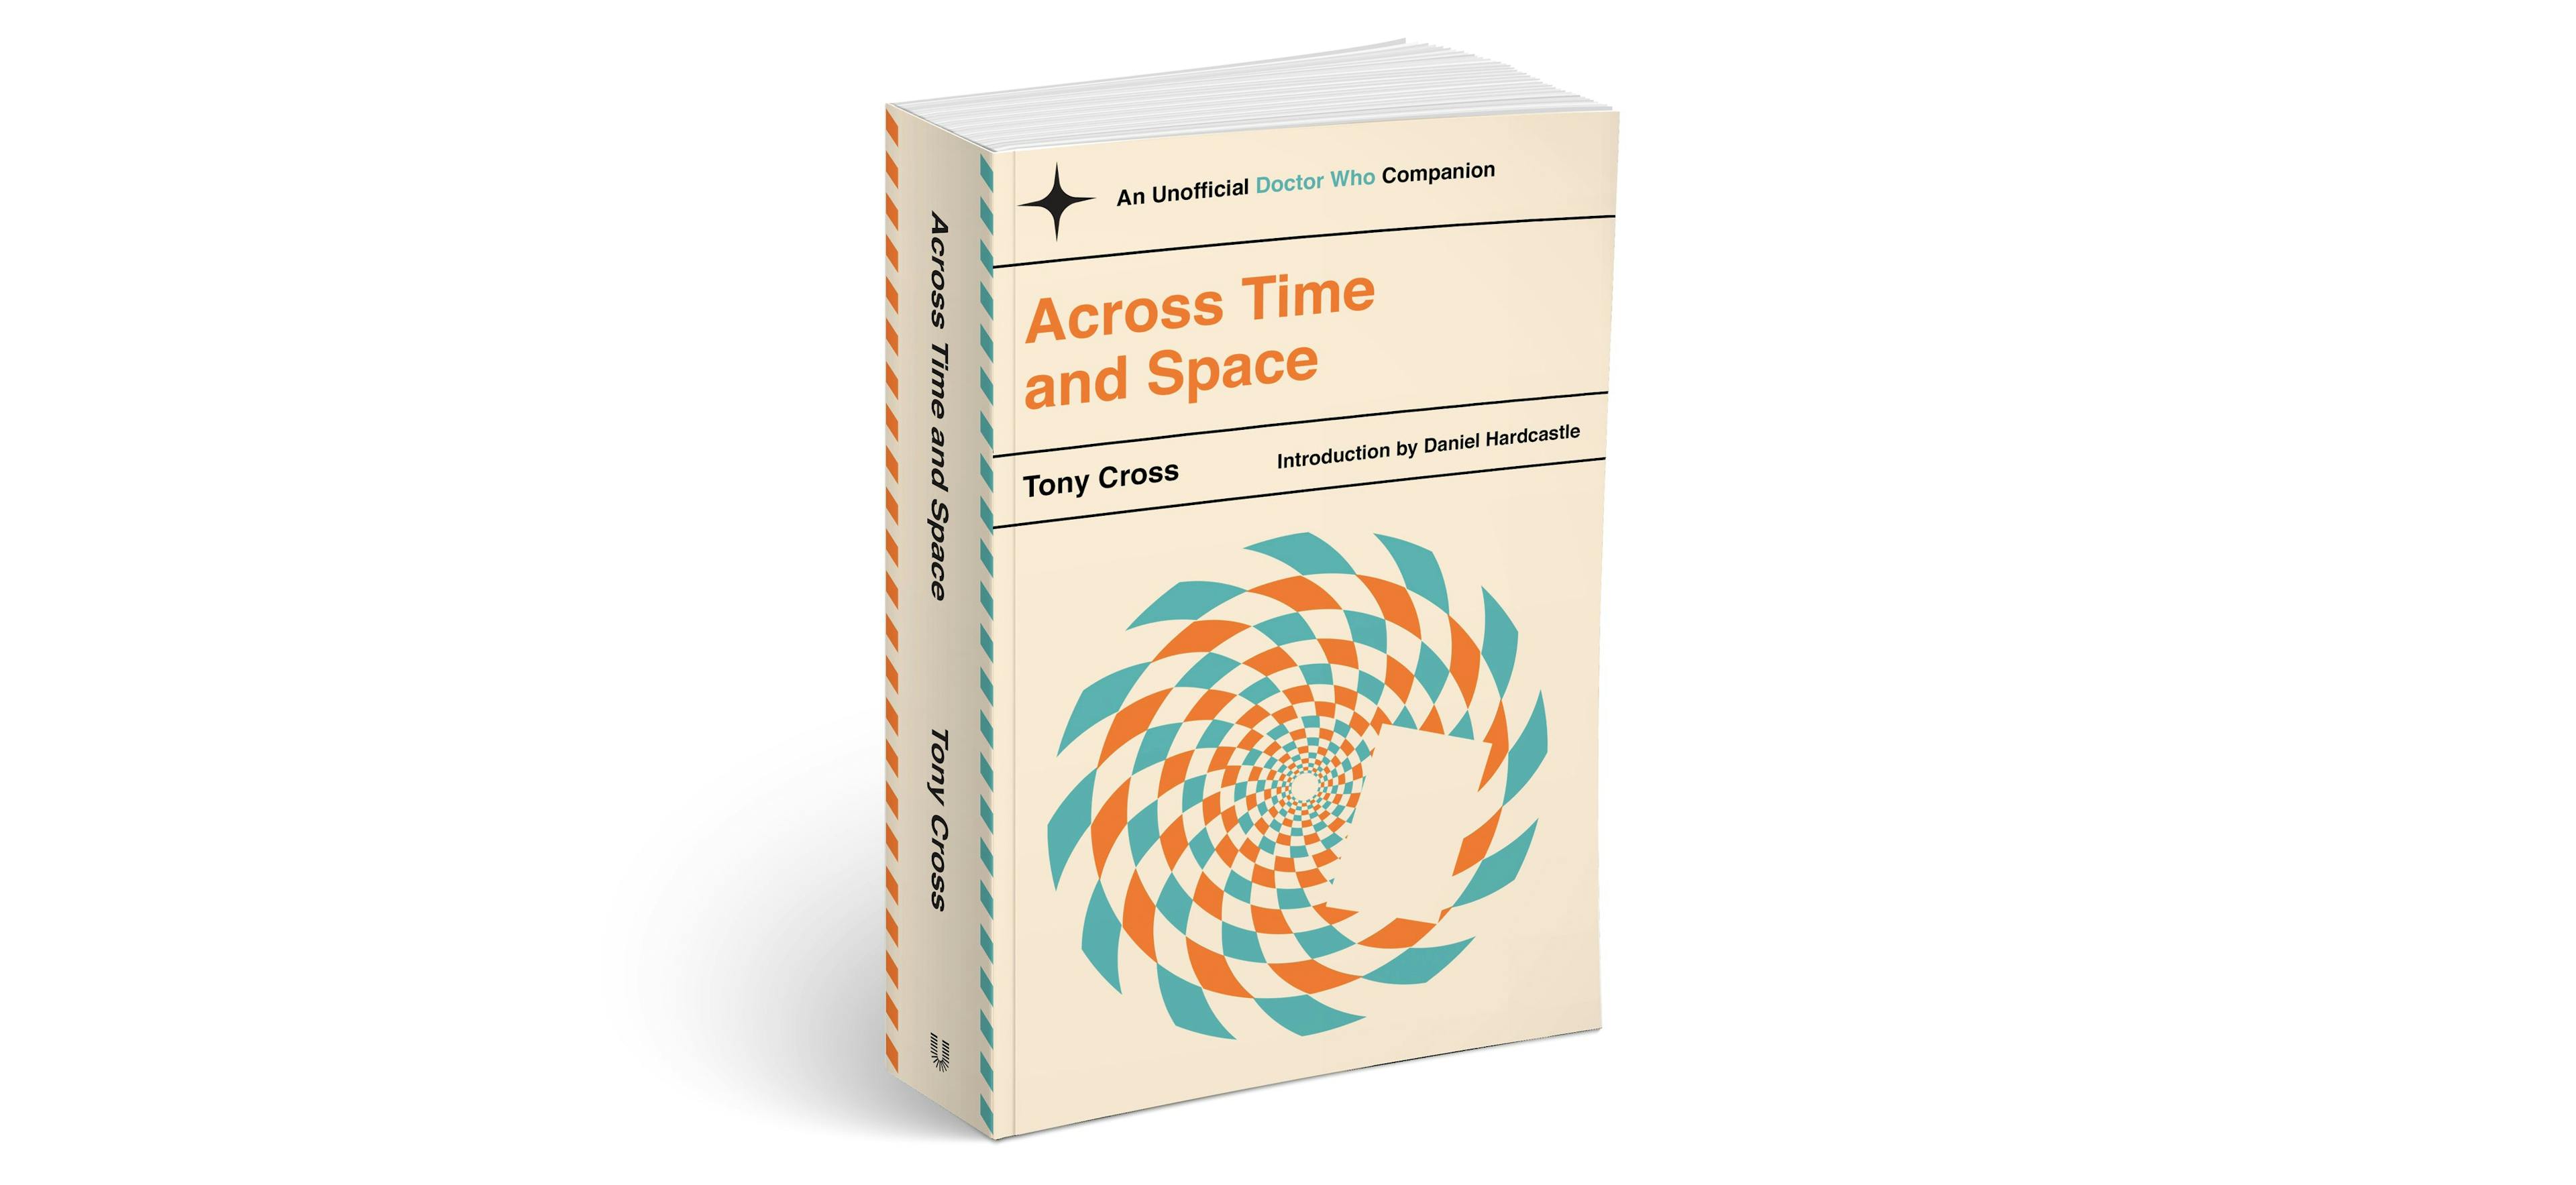 Across Time and Space